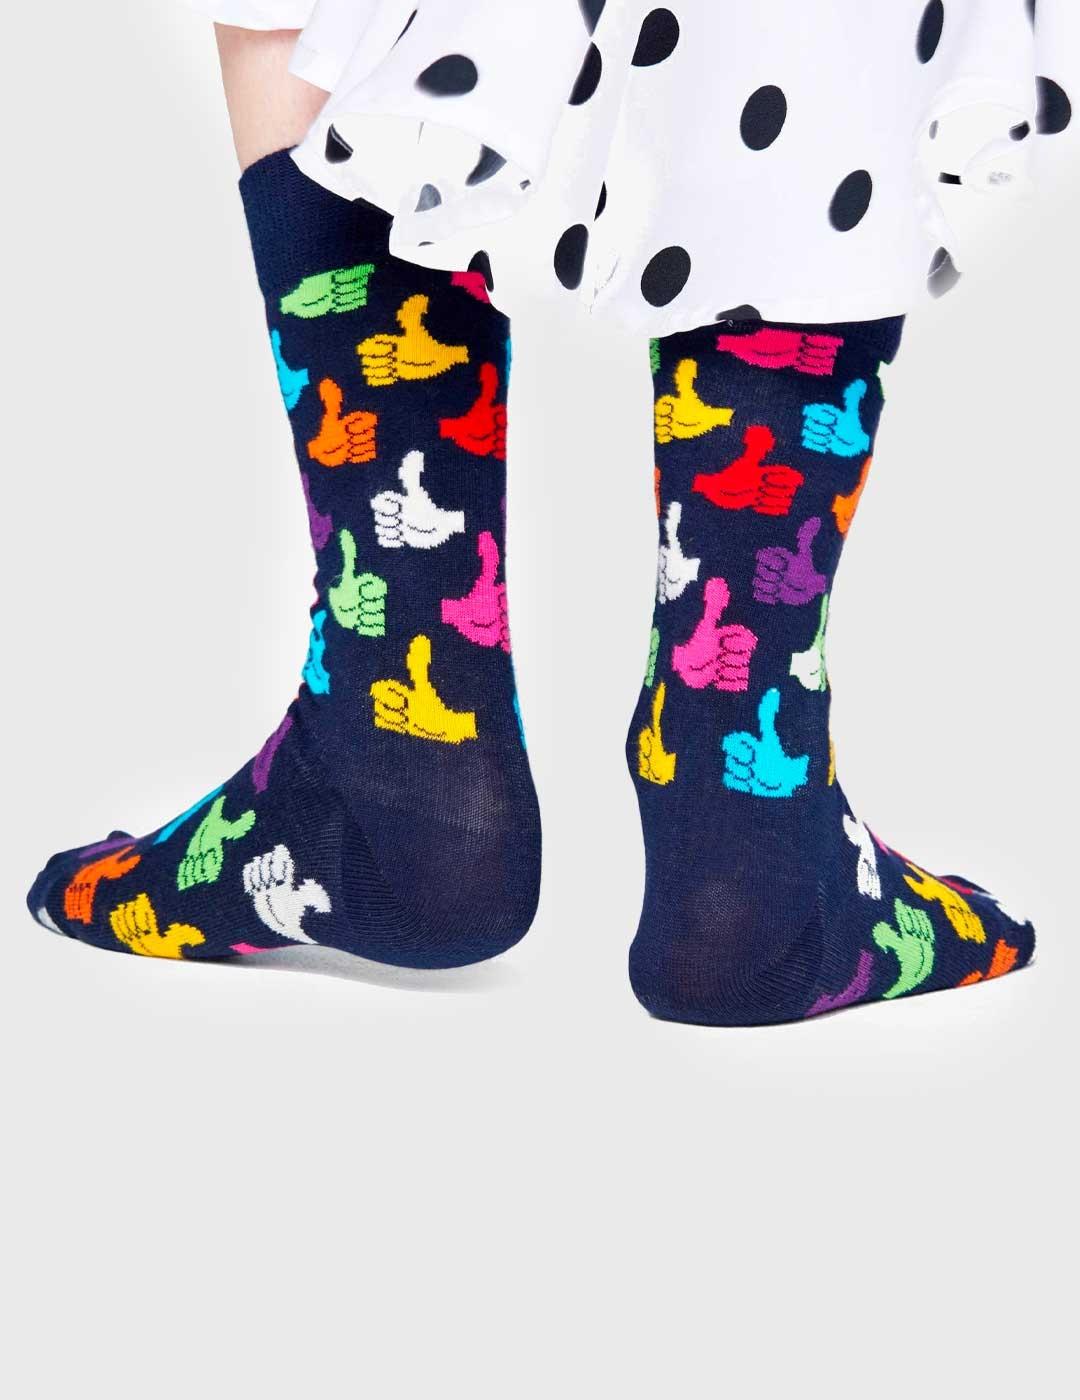 Calcetines Happy Socks Thums Up multicolor unisex